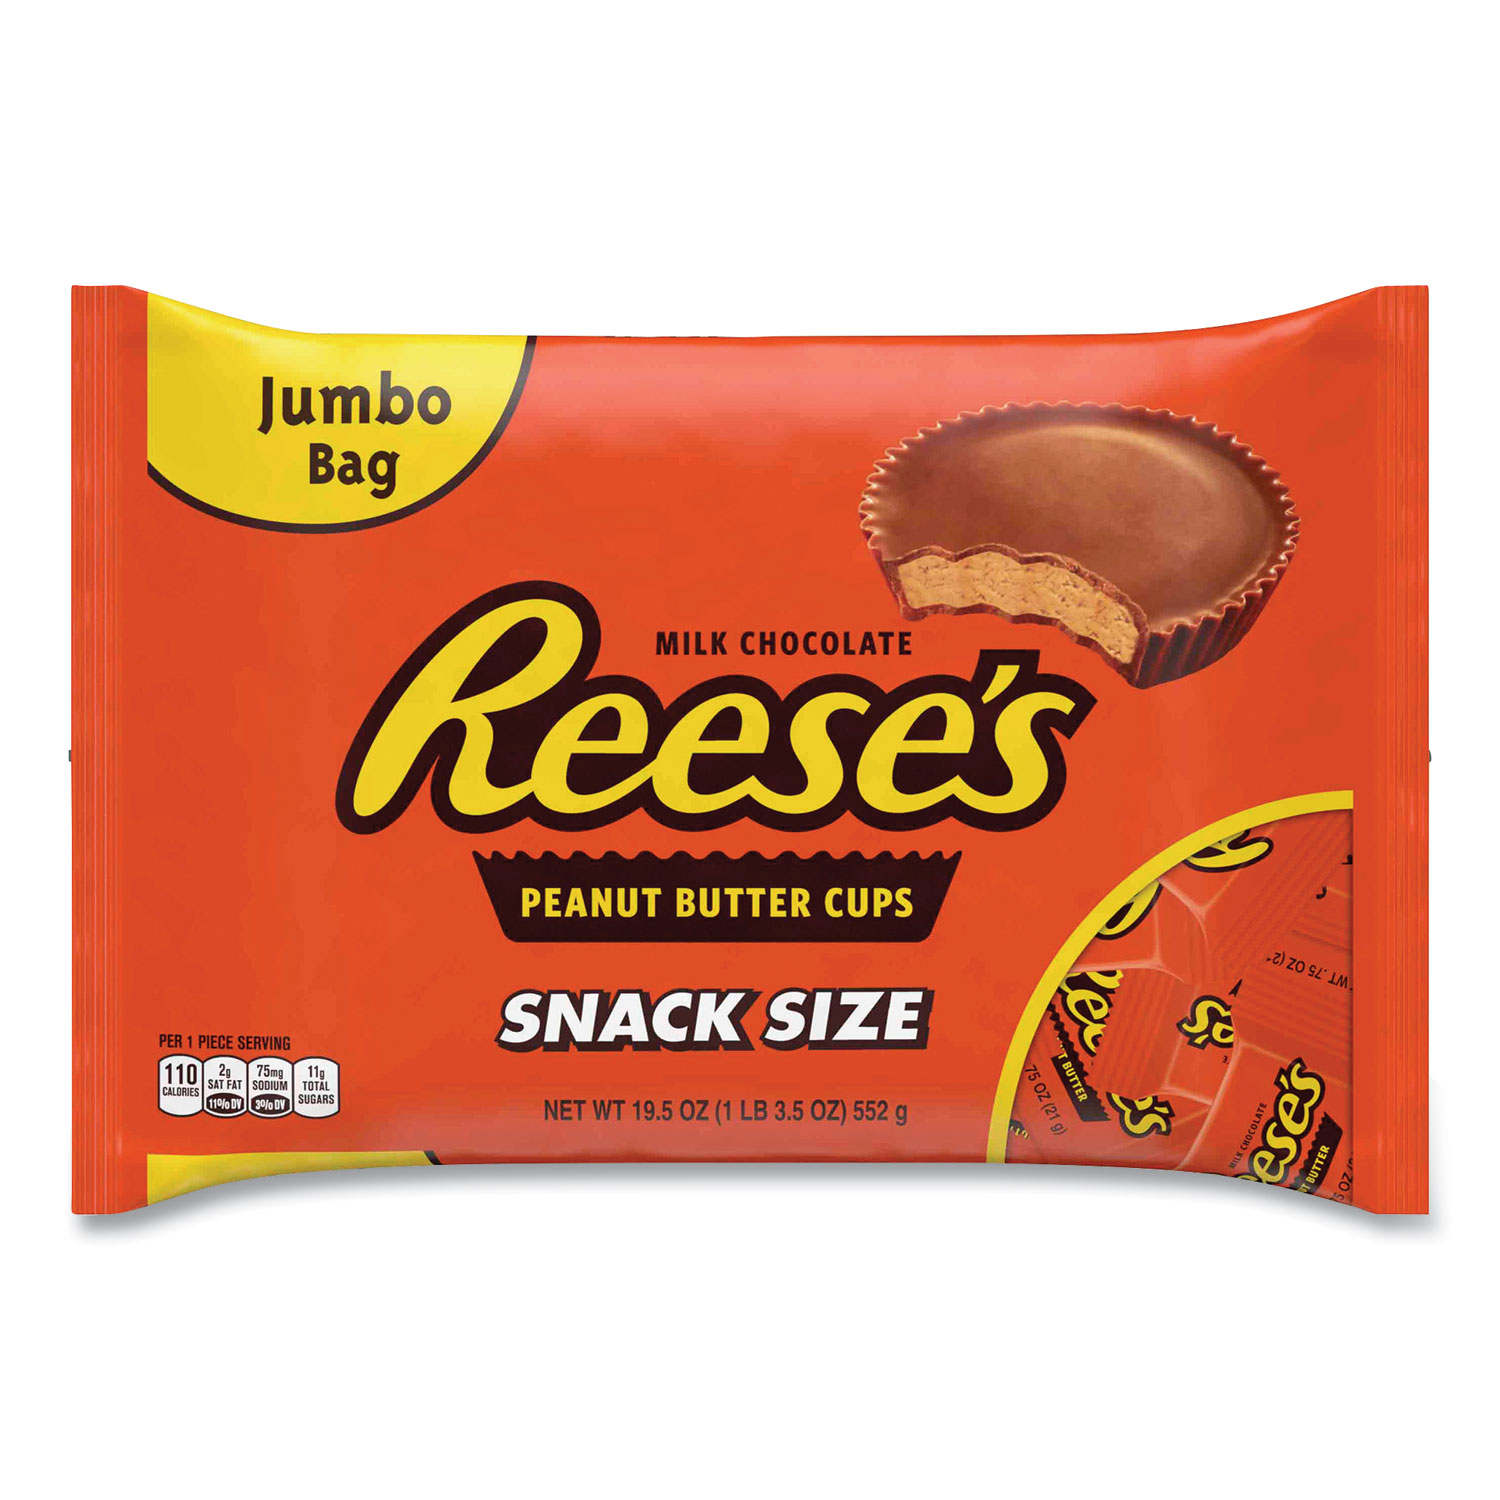  Reese's 40362 Snack Size Peanut Butter Cups, Jumbo Bag, 19.5 oz Bag, Free Delivery in 1-4 Business Days (GRR24600012) 